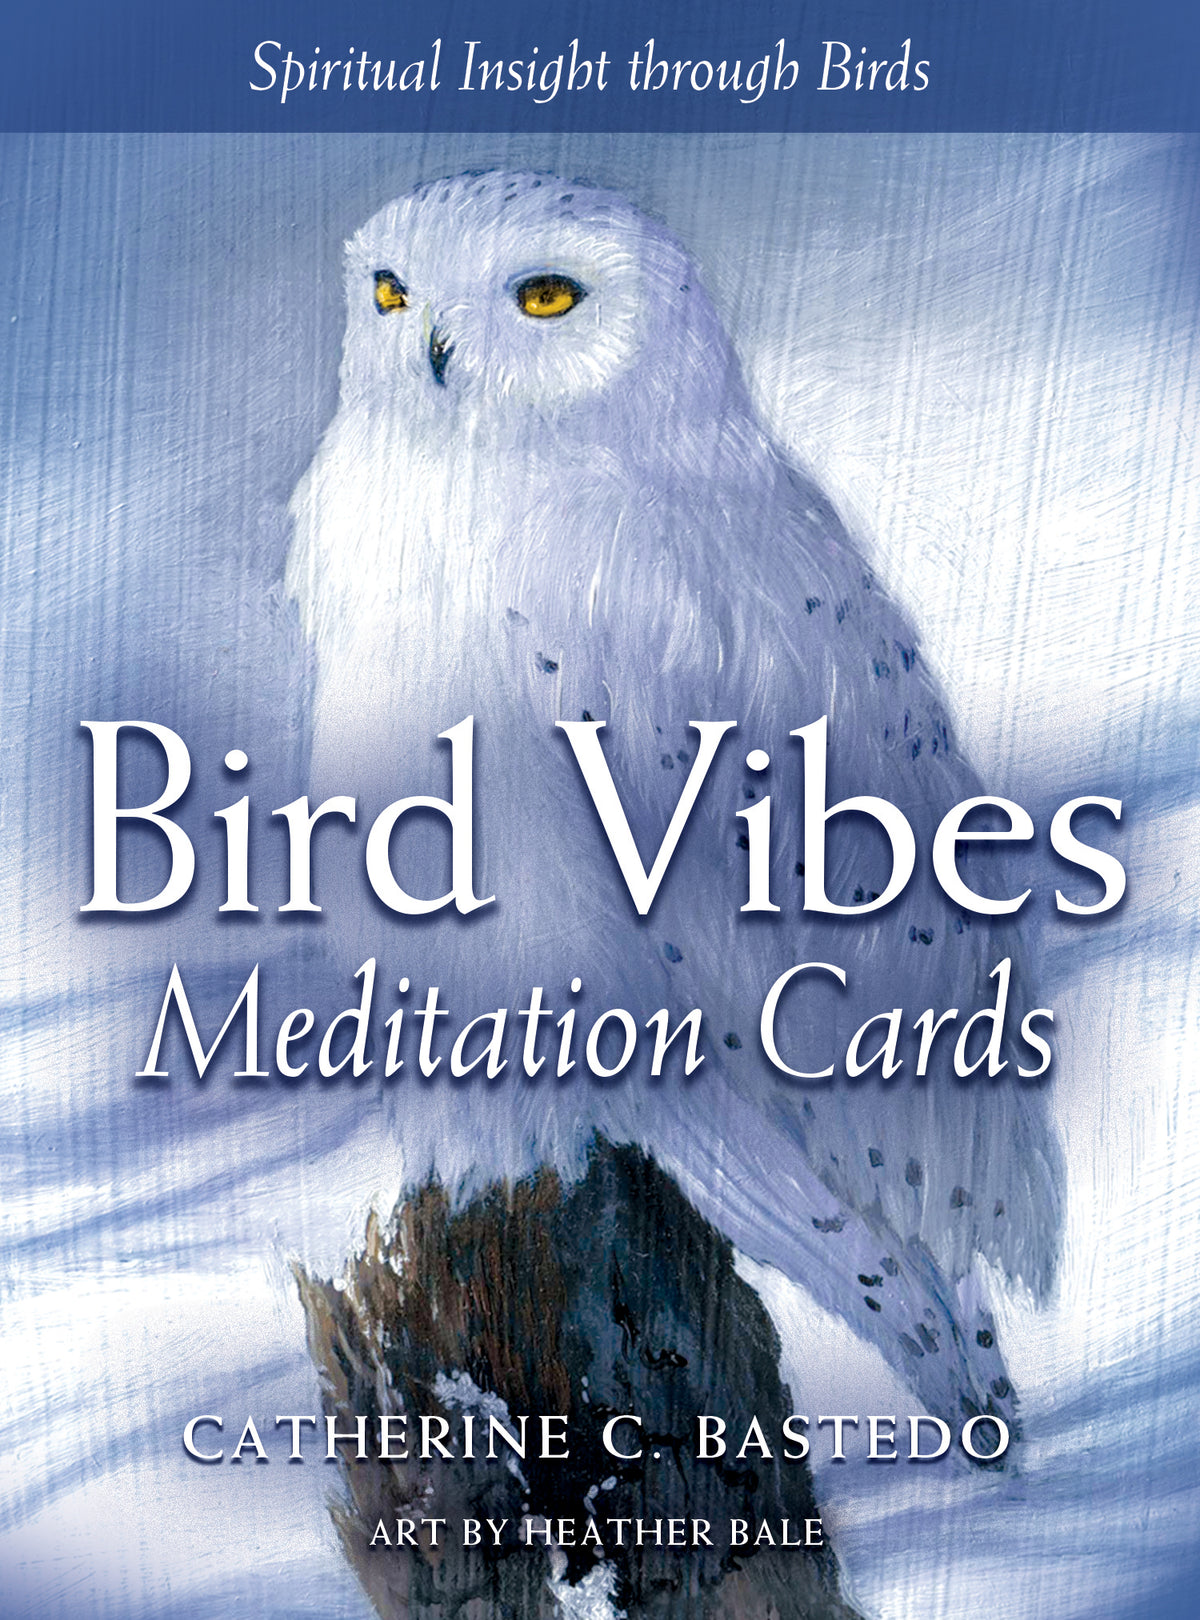 Visionary I Ching Cards - Beyond Words Publishing